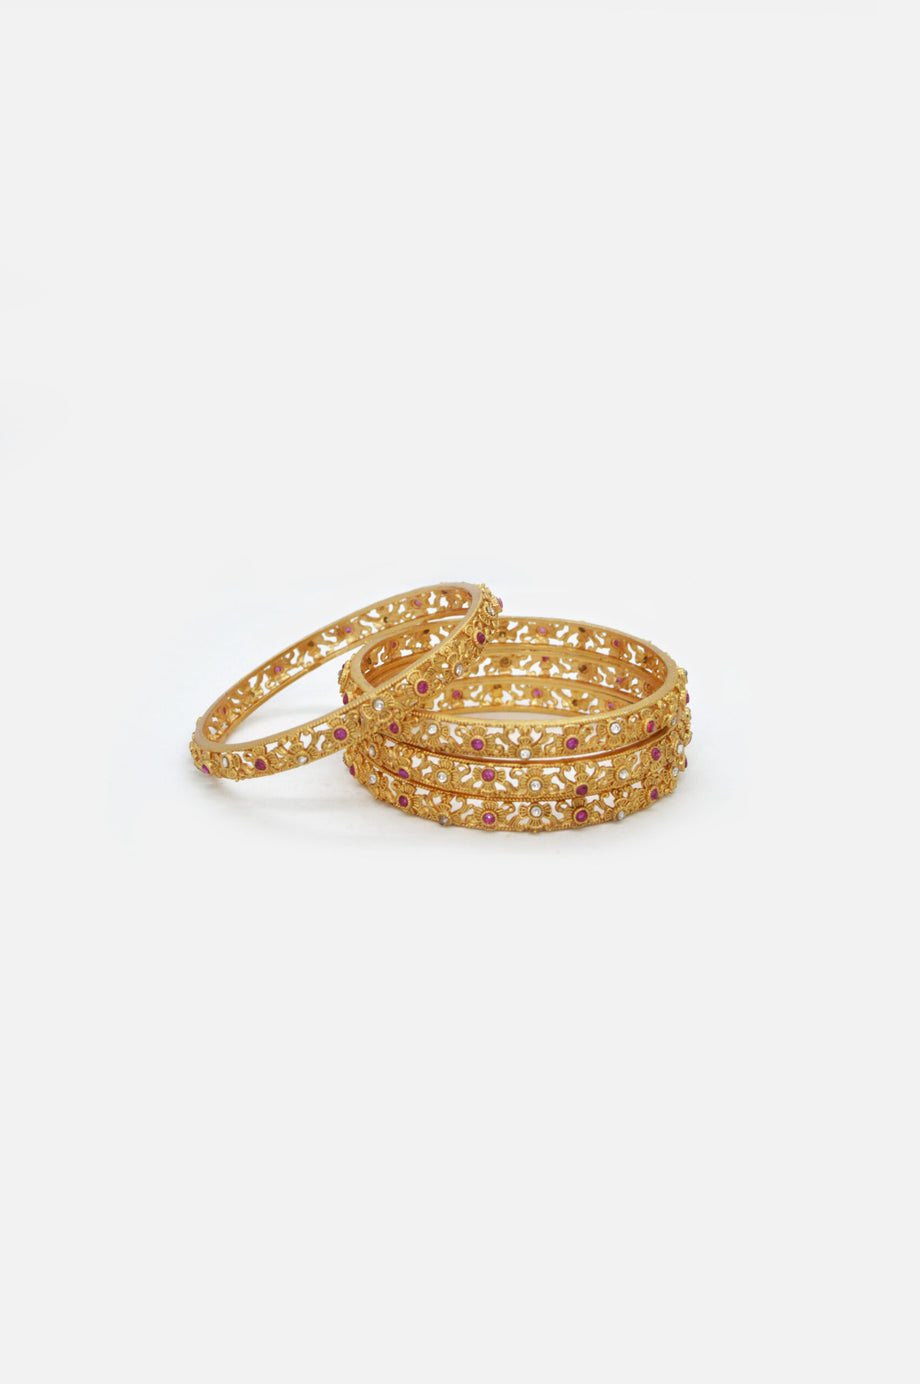 24K Gold Heart Gold Plated Bangles Flipkart Bracelet Fashionable And Lucky  Womens Jewelry Gift With Drop Delivery From Luckyhat, $3.5 | DHgate.Com